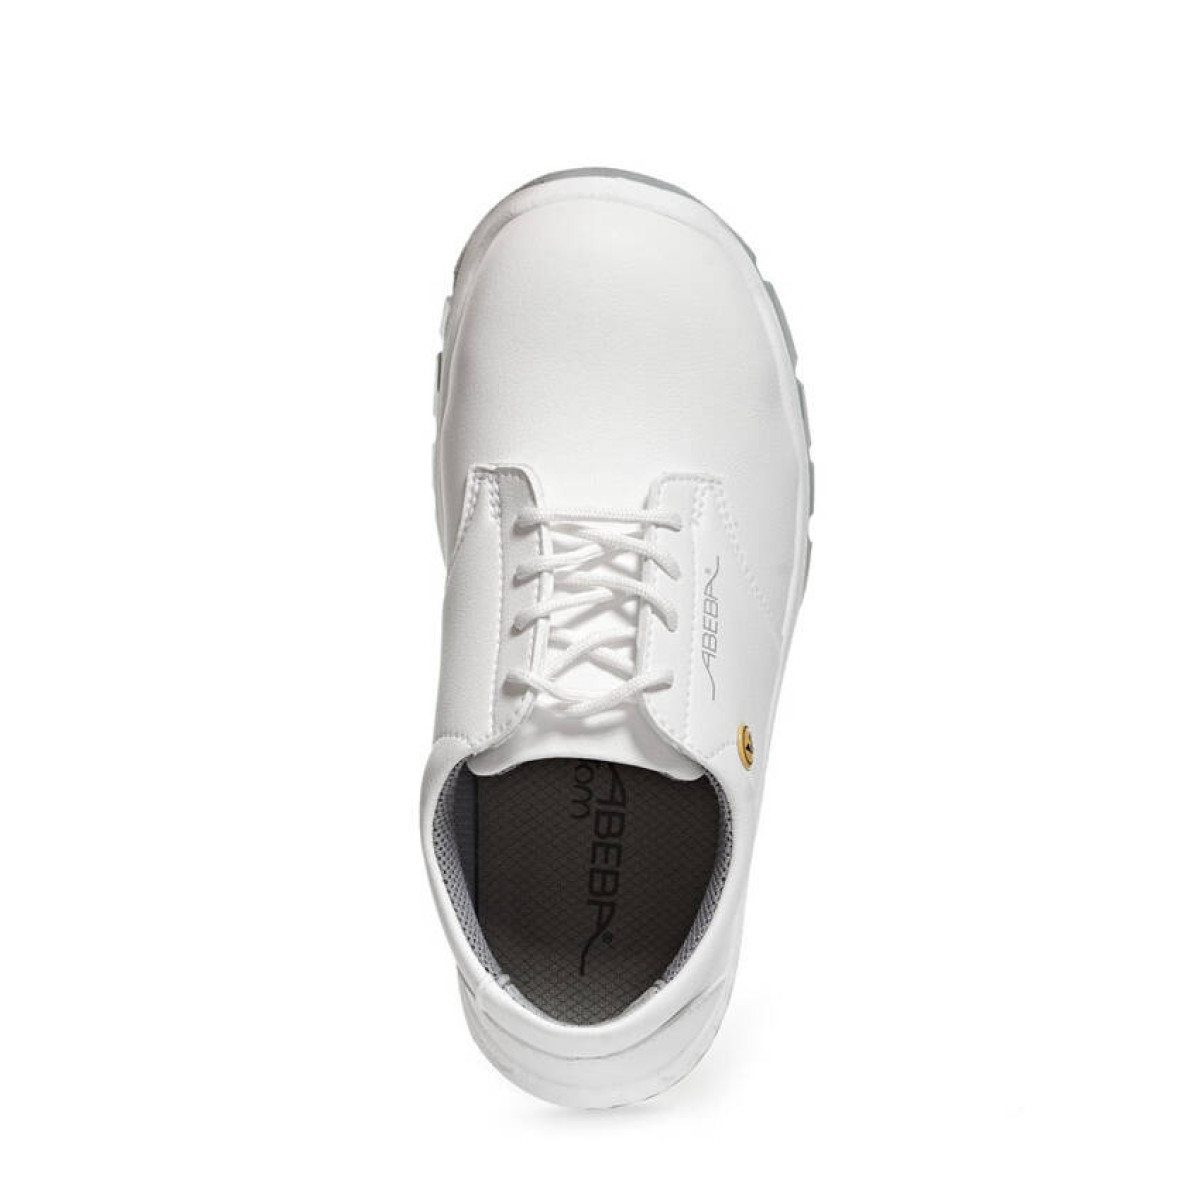 Color:white with steel cap, Size:48